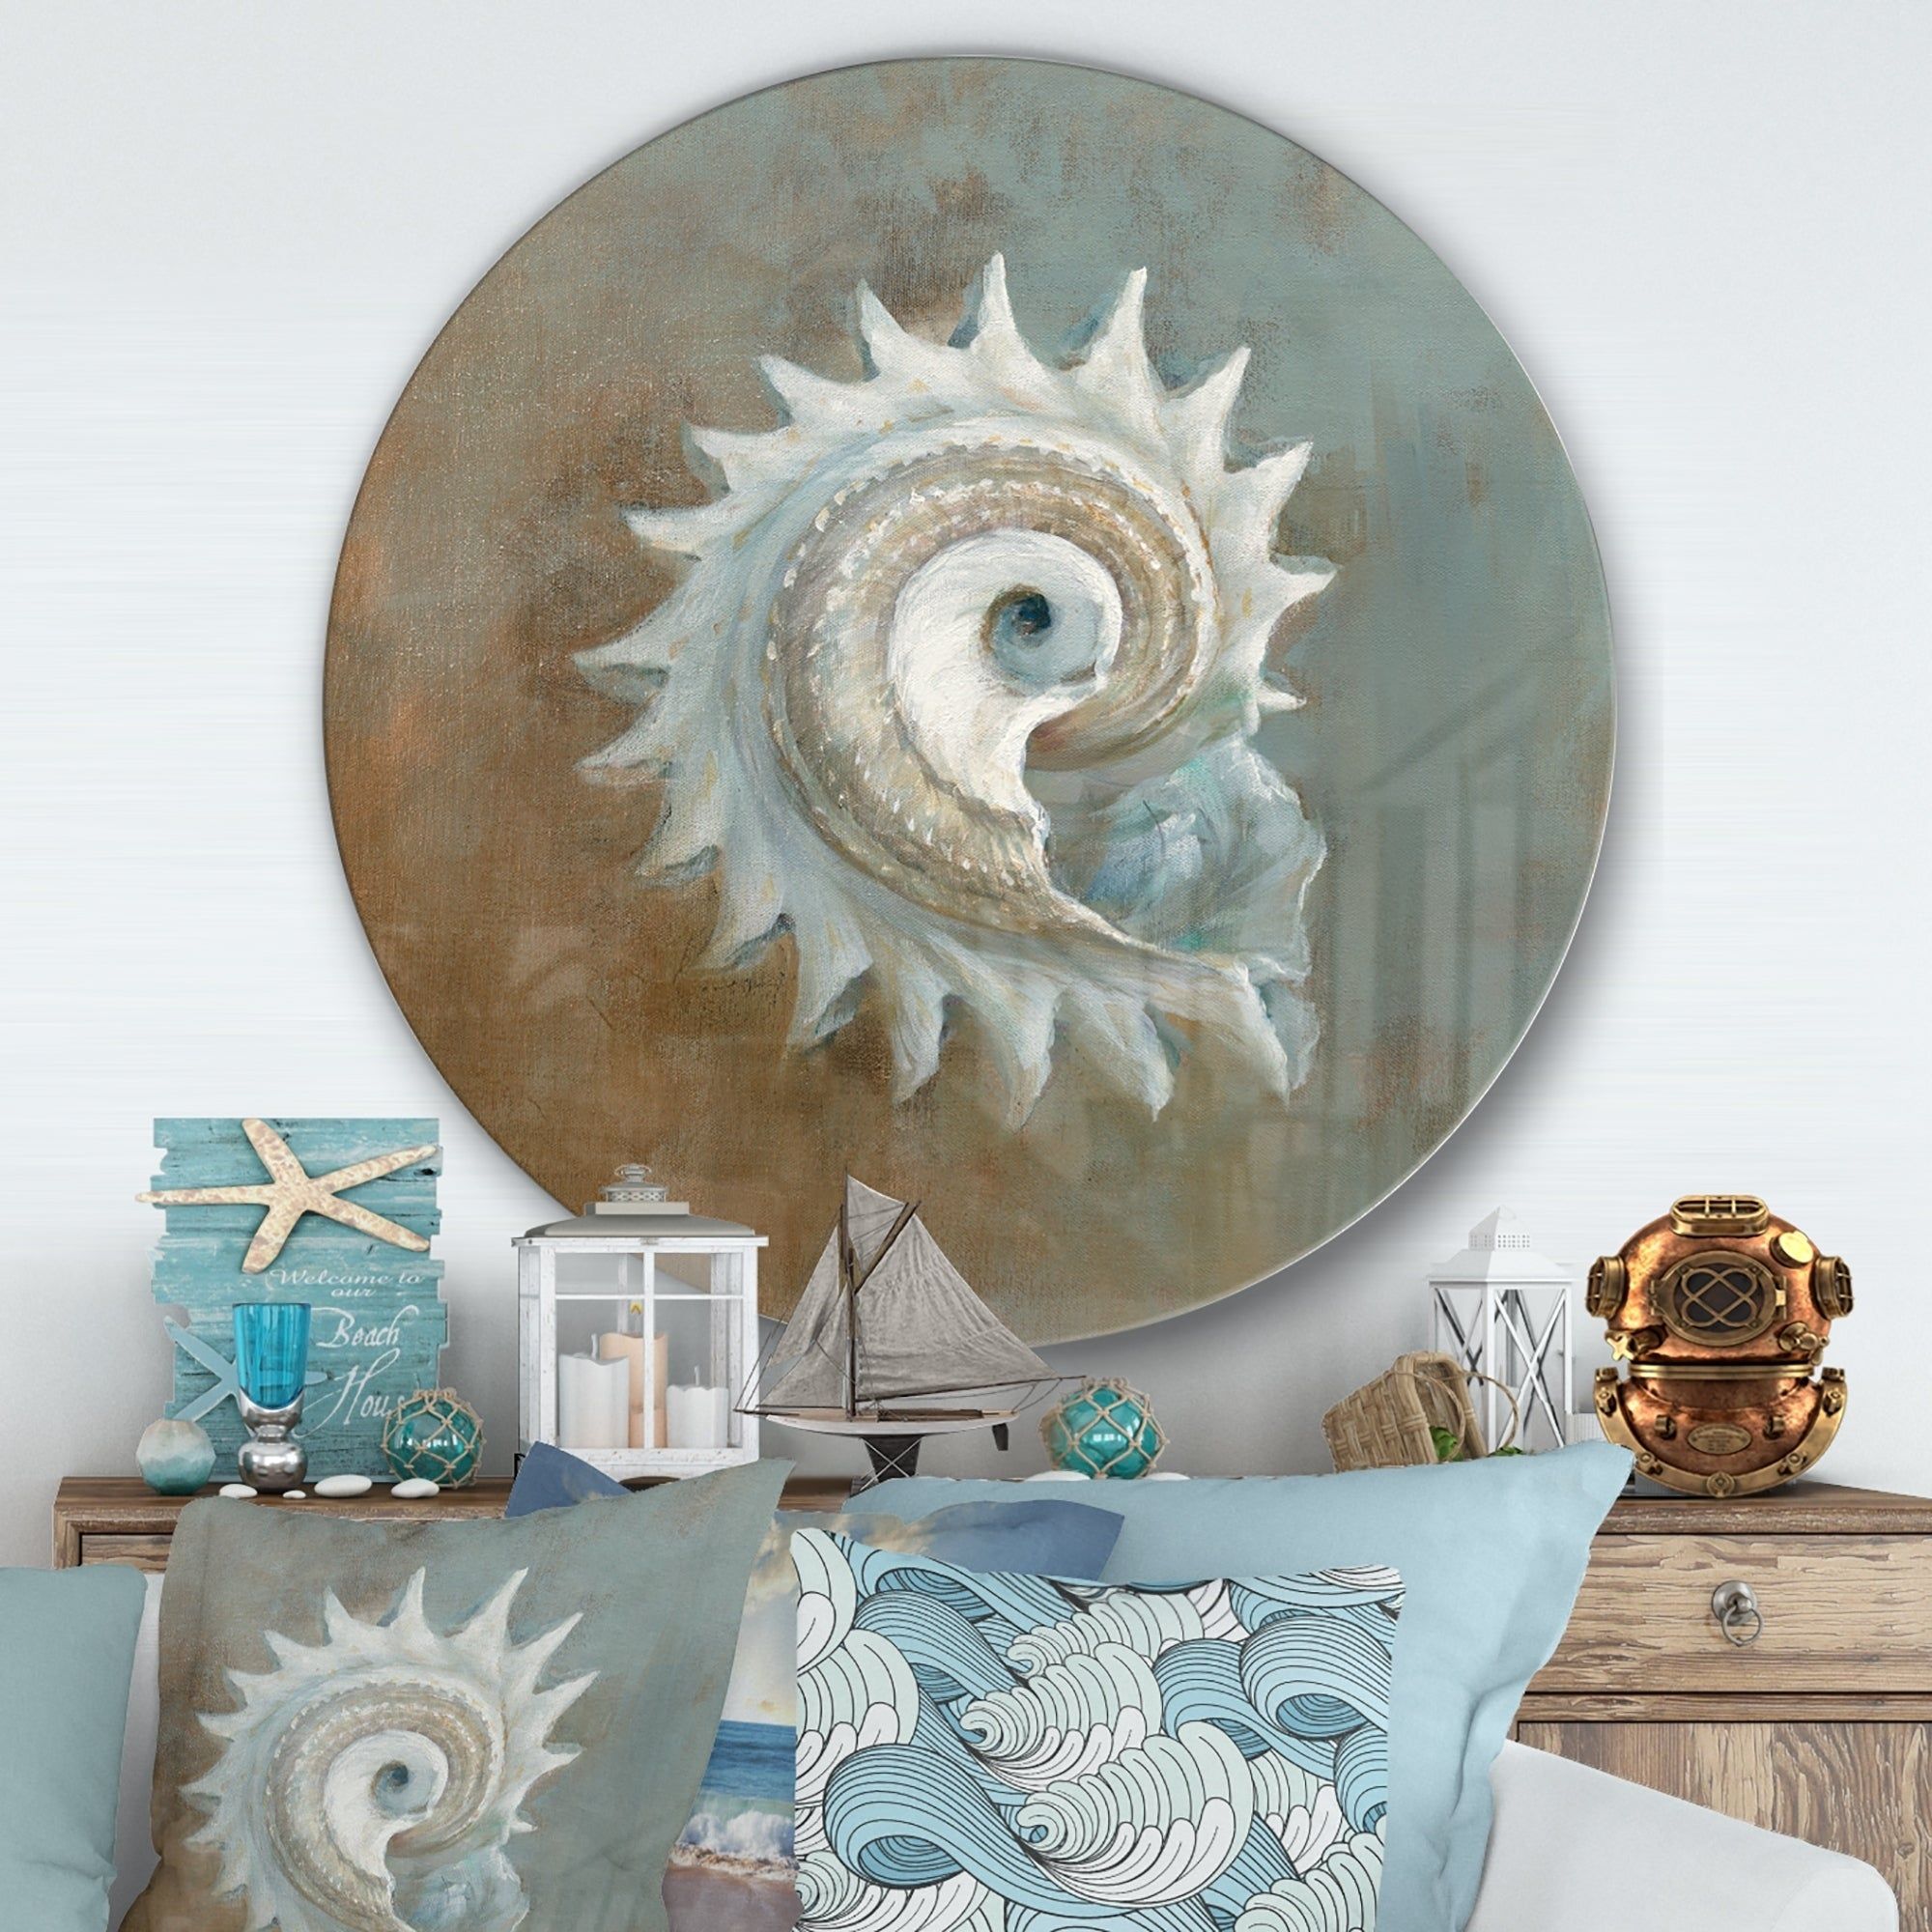 Metal Art | Find Great Art Gallery Deals Shopping At Overstock With Regard To 2 Piece Multiple Layer Metal Flower Wall Decor Sets (View 8 of 30)